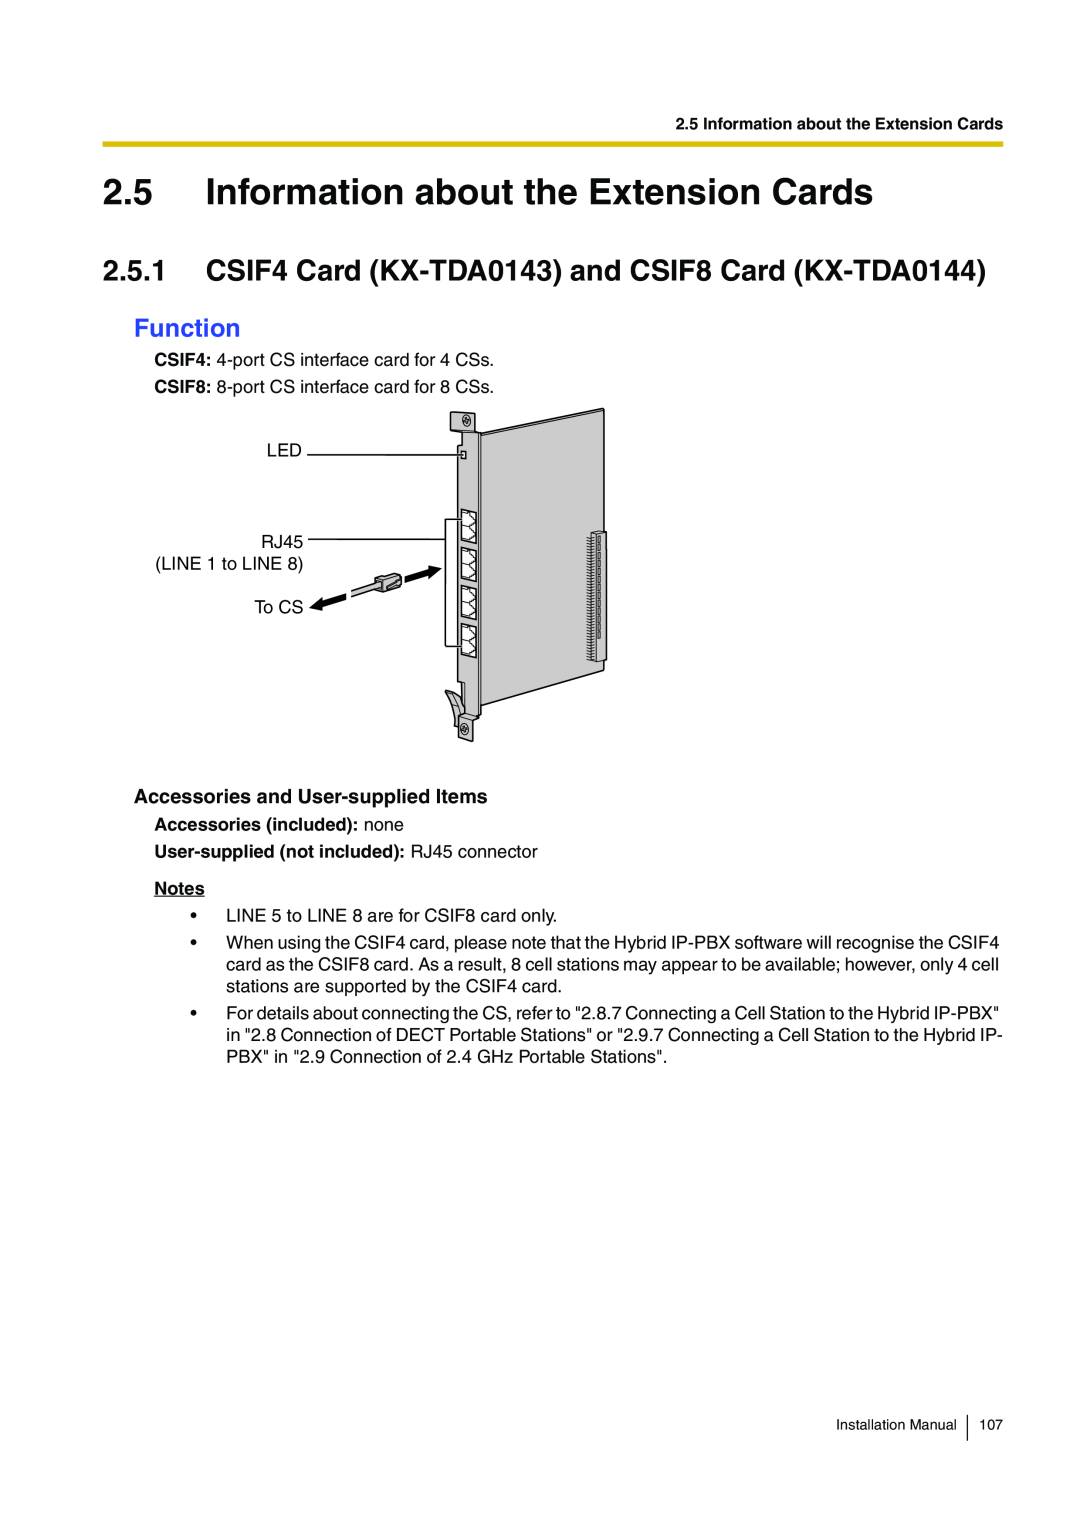 Panasonic KX-TDA100 Information about the Extension Cards, CSIF4 Card KX-TDA0143 and CSIF8 Card KX-TDA0144, Function 